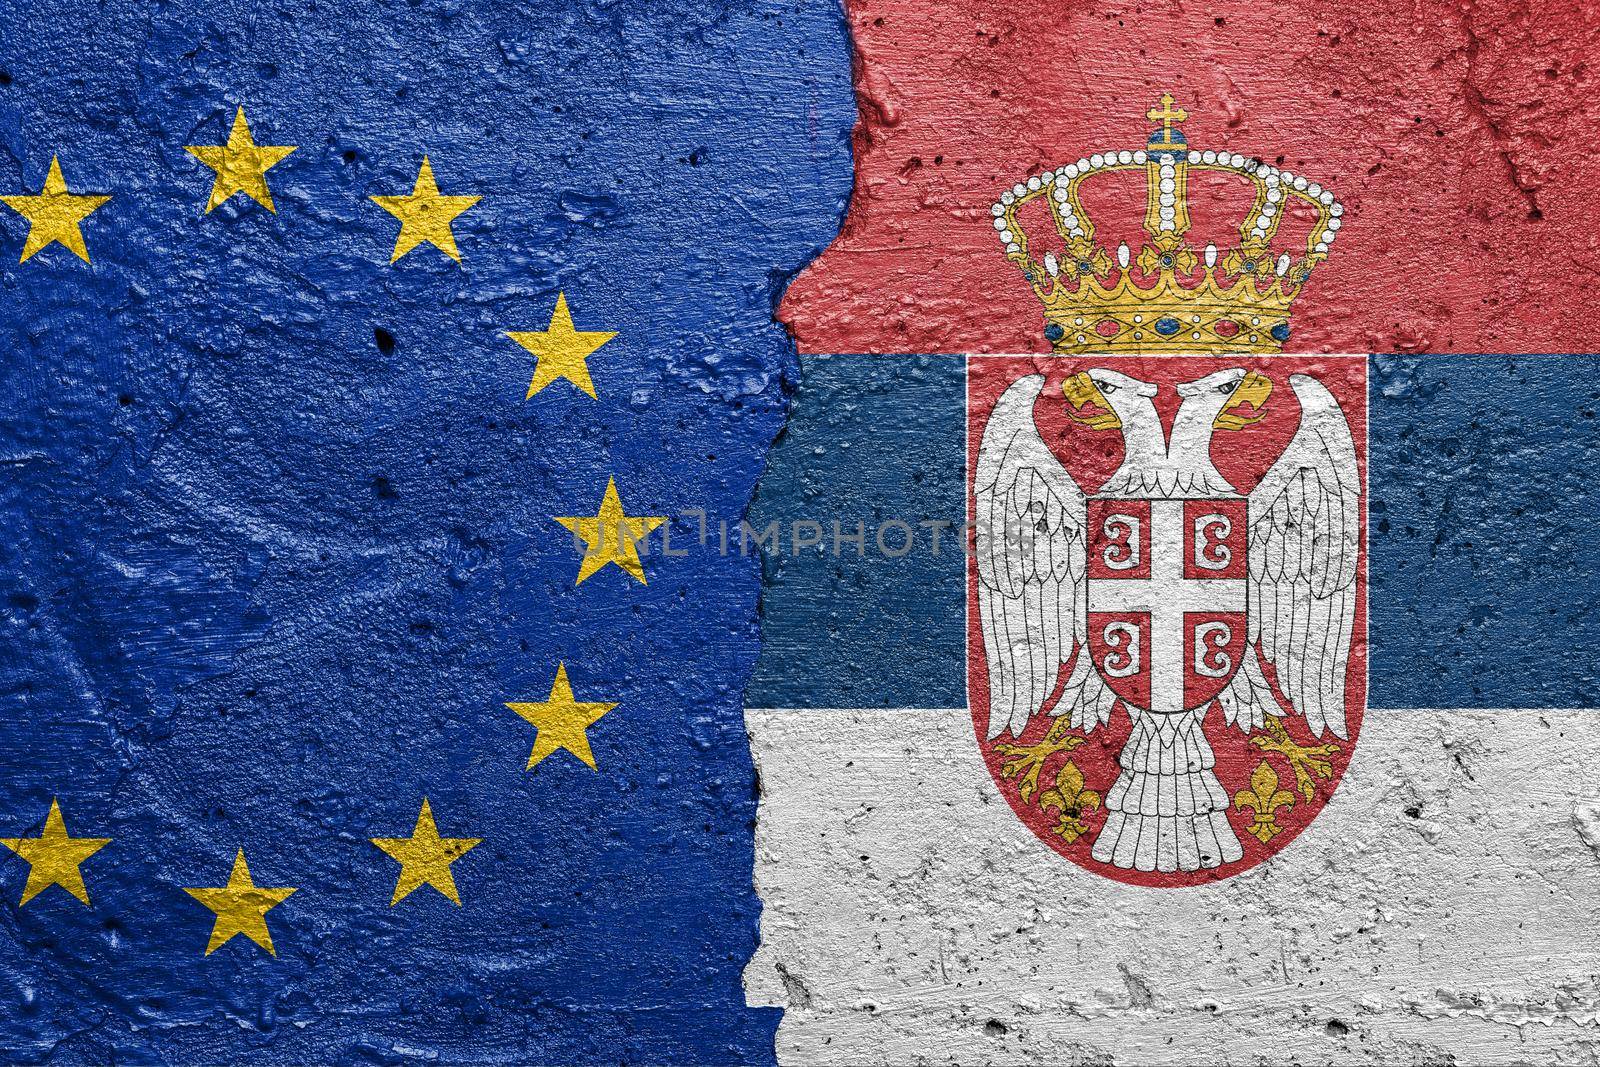 European Union and Serbia flags  - Cracked concrete wall painted with a EU flag on the left and a Serbian flag on the right